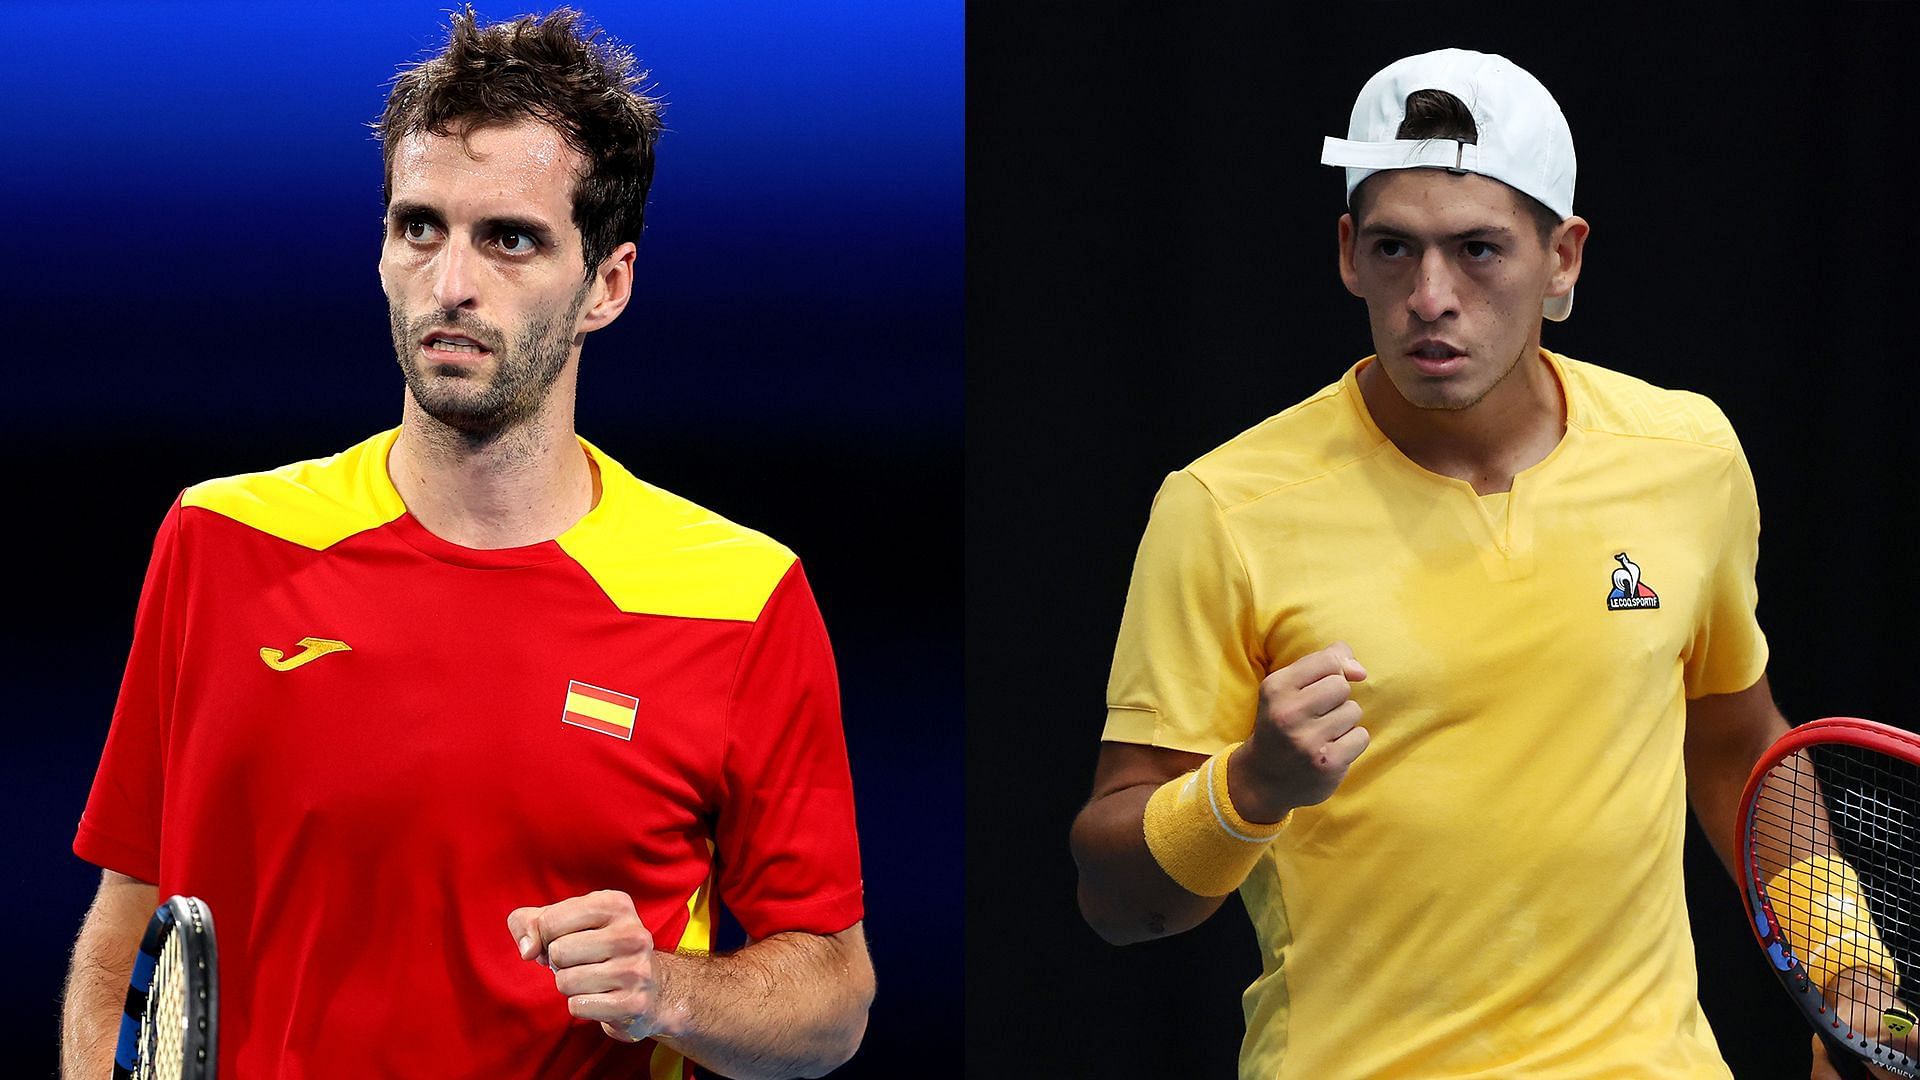 Ramos-Vinolas (left) is two wins away from defending his Cordoba title.